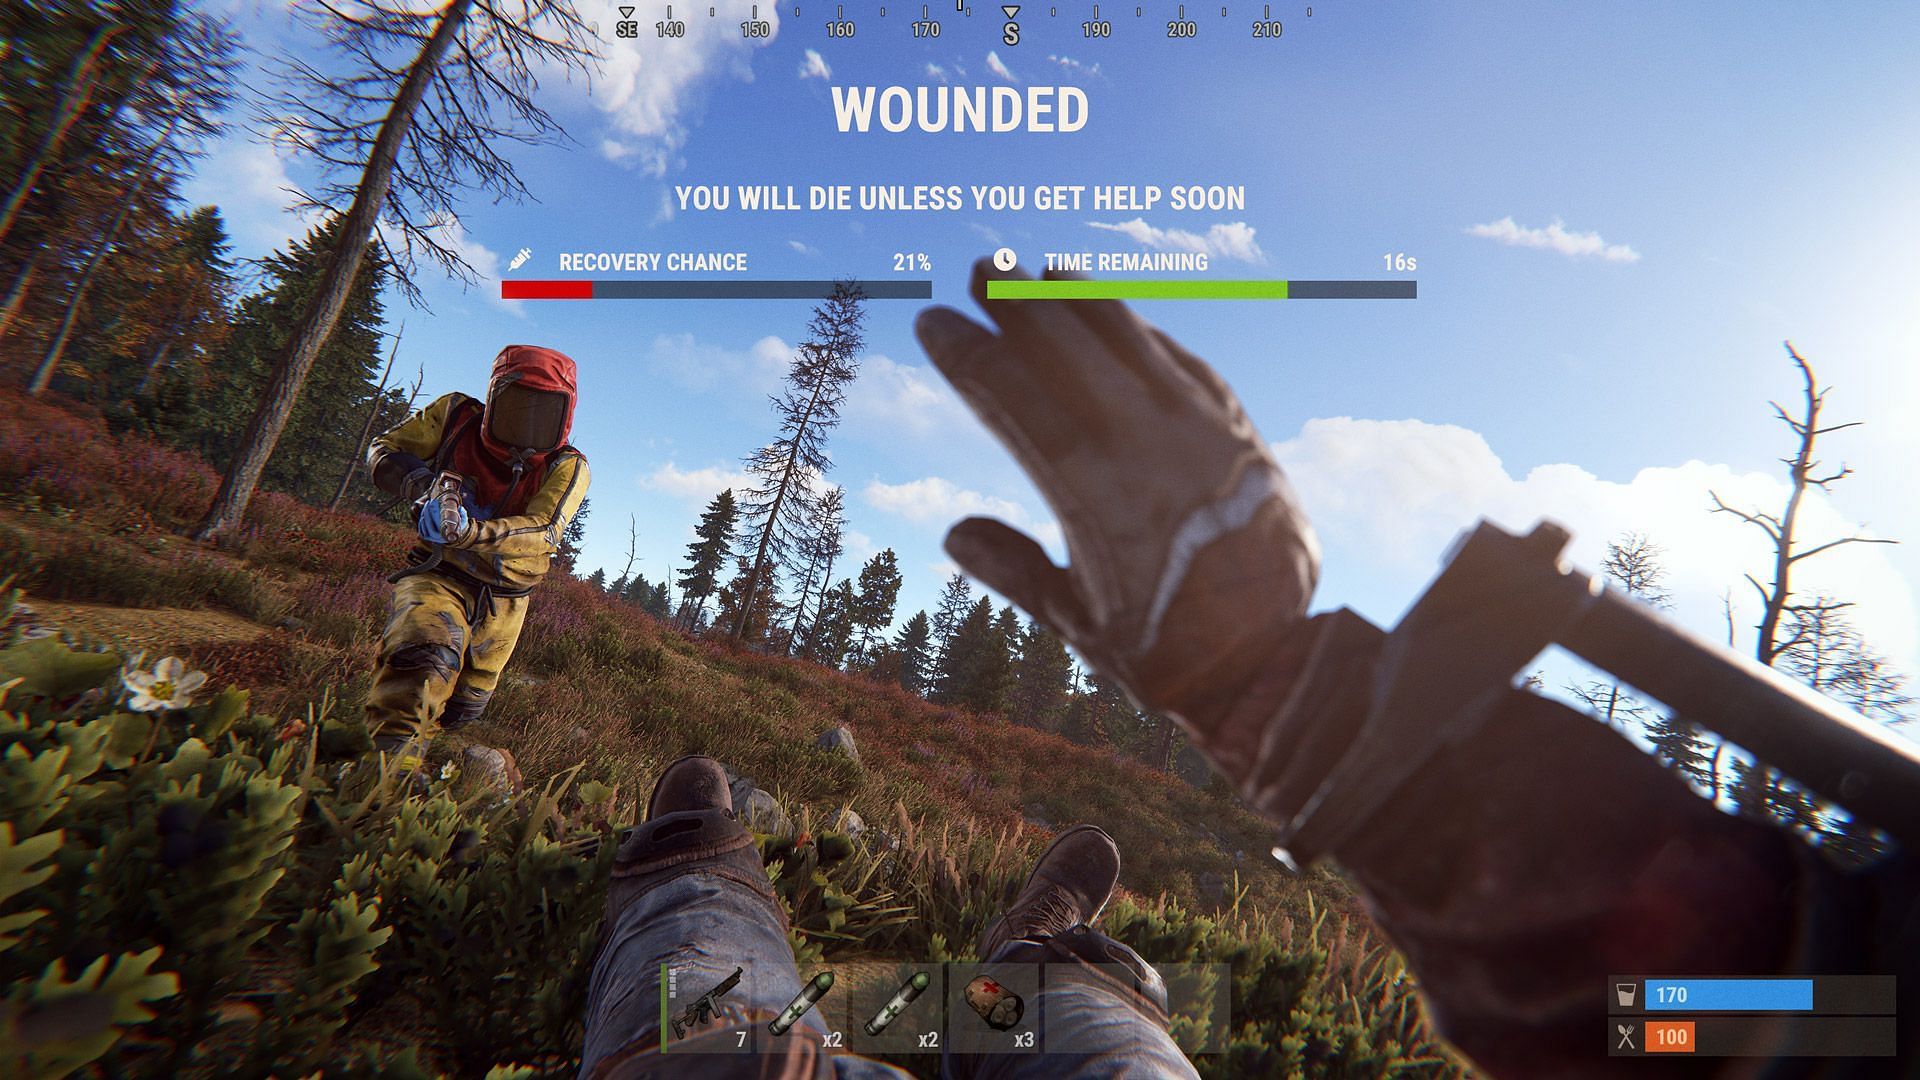 New Wounded UI (Image via Facepunch Studios)